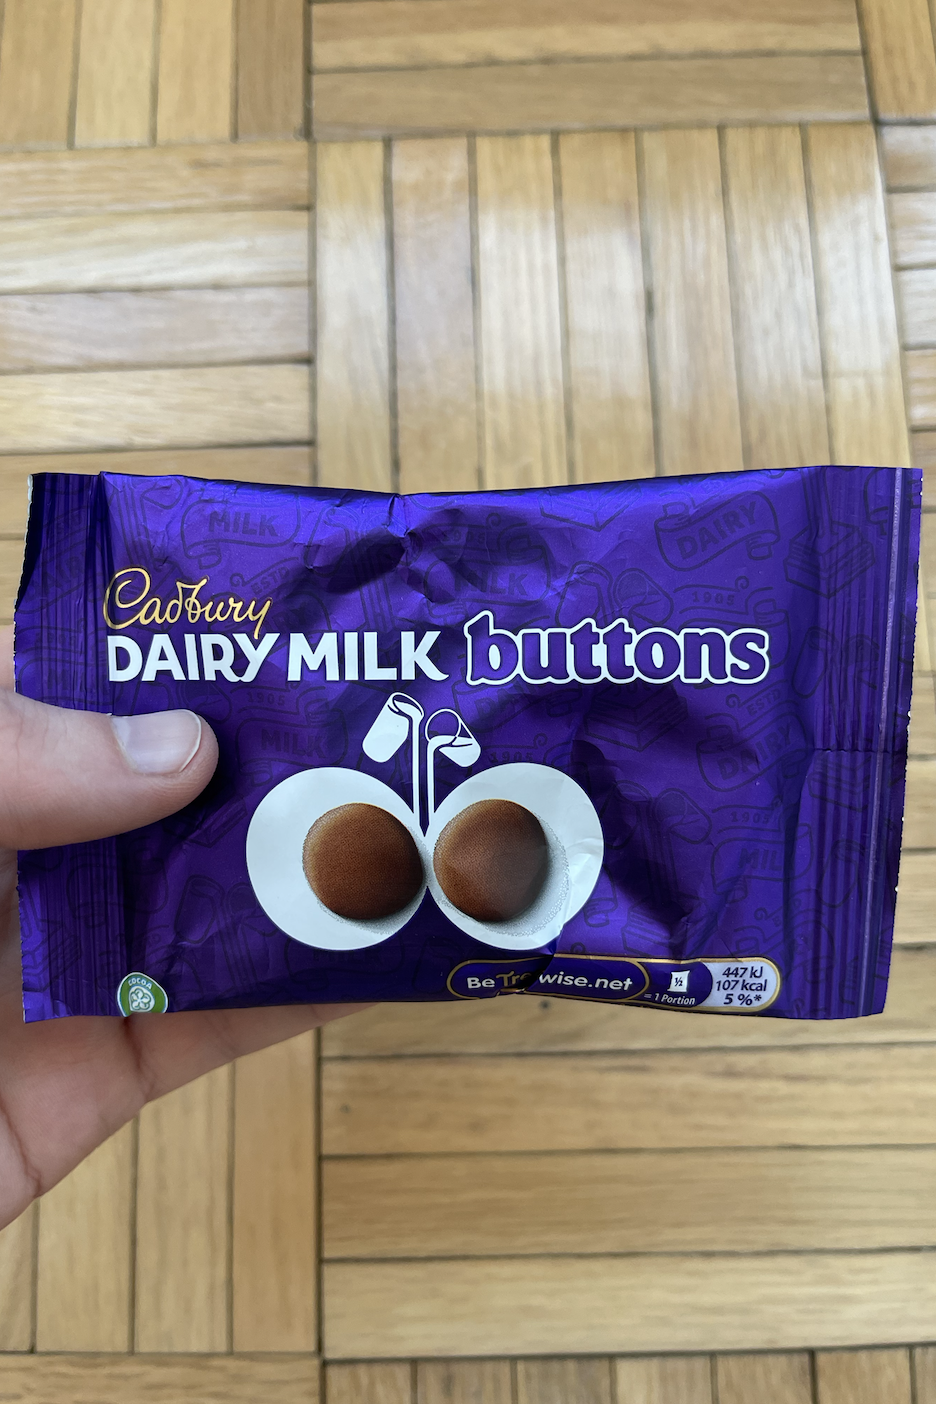 Hand holding a Cadbury Dairy Milk Buttons pack with two chocolate pieces shown on the front